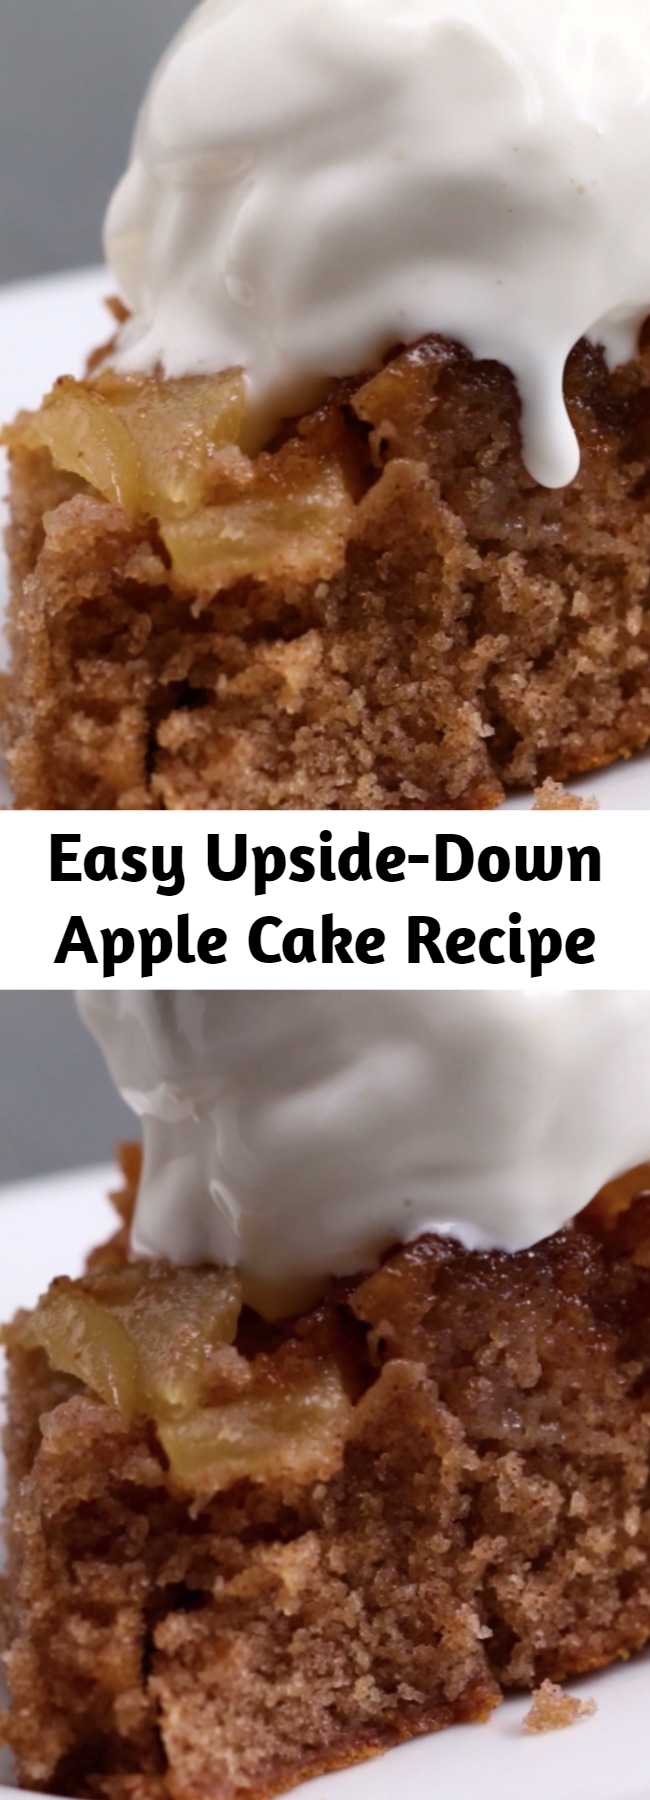 Easy Upside-Down Apple Cake Recipe - This apple cake is absolutely scrumptious! Especially with a side of vanilla ice cream.